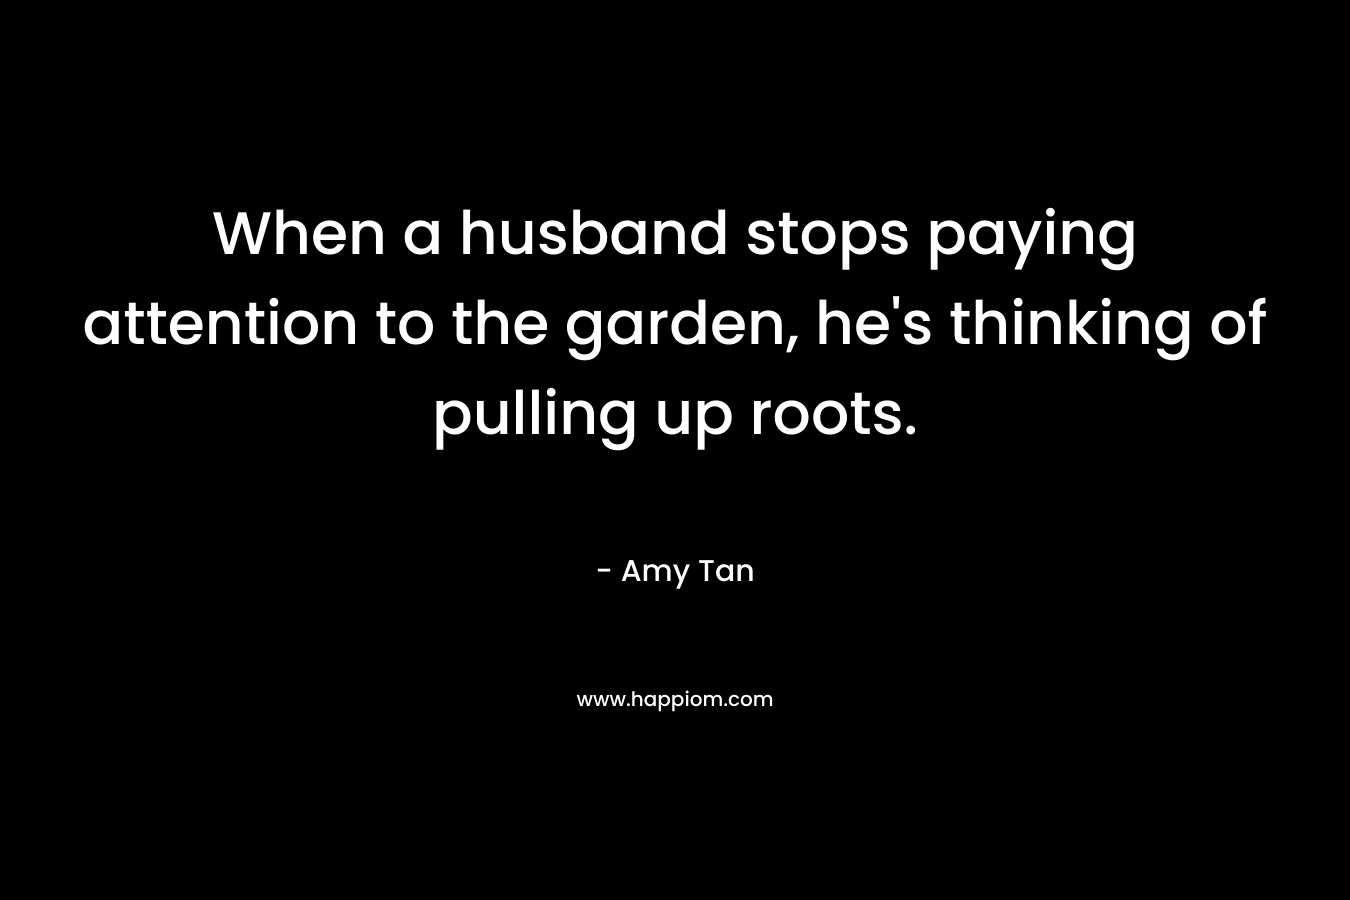 When a husband stops paying attention to the garden, he's thinking of pulling up roots.